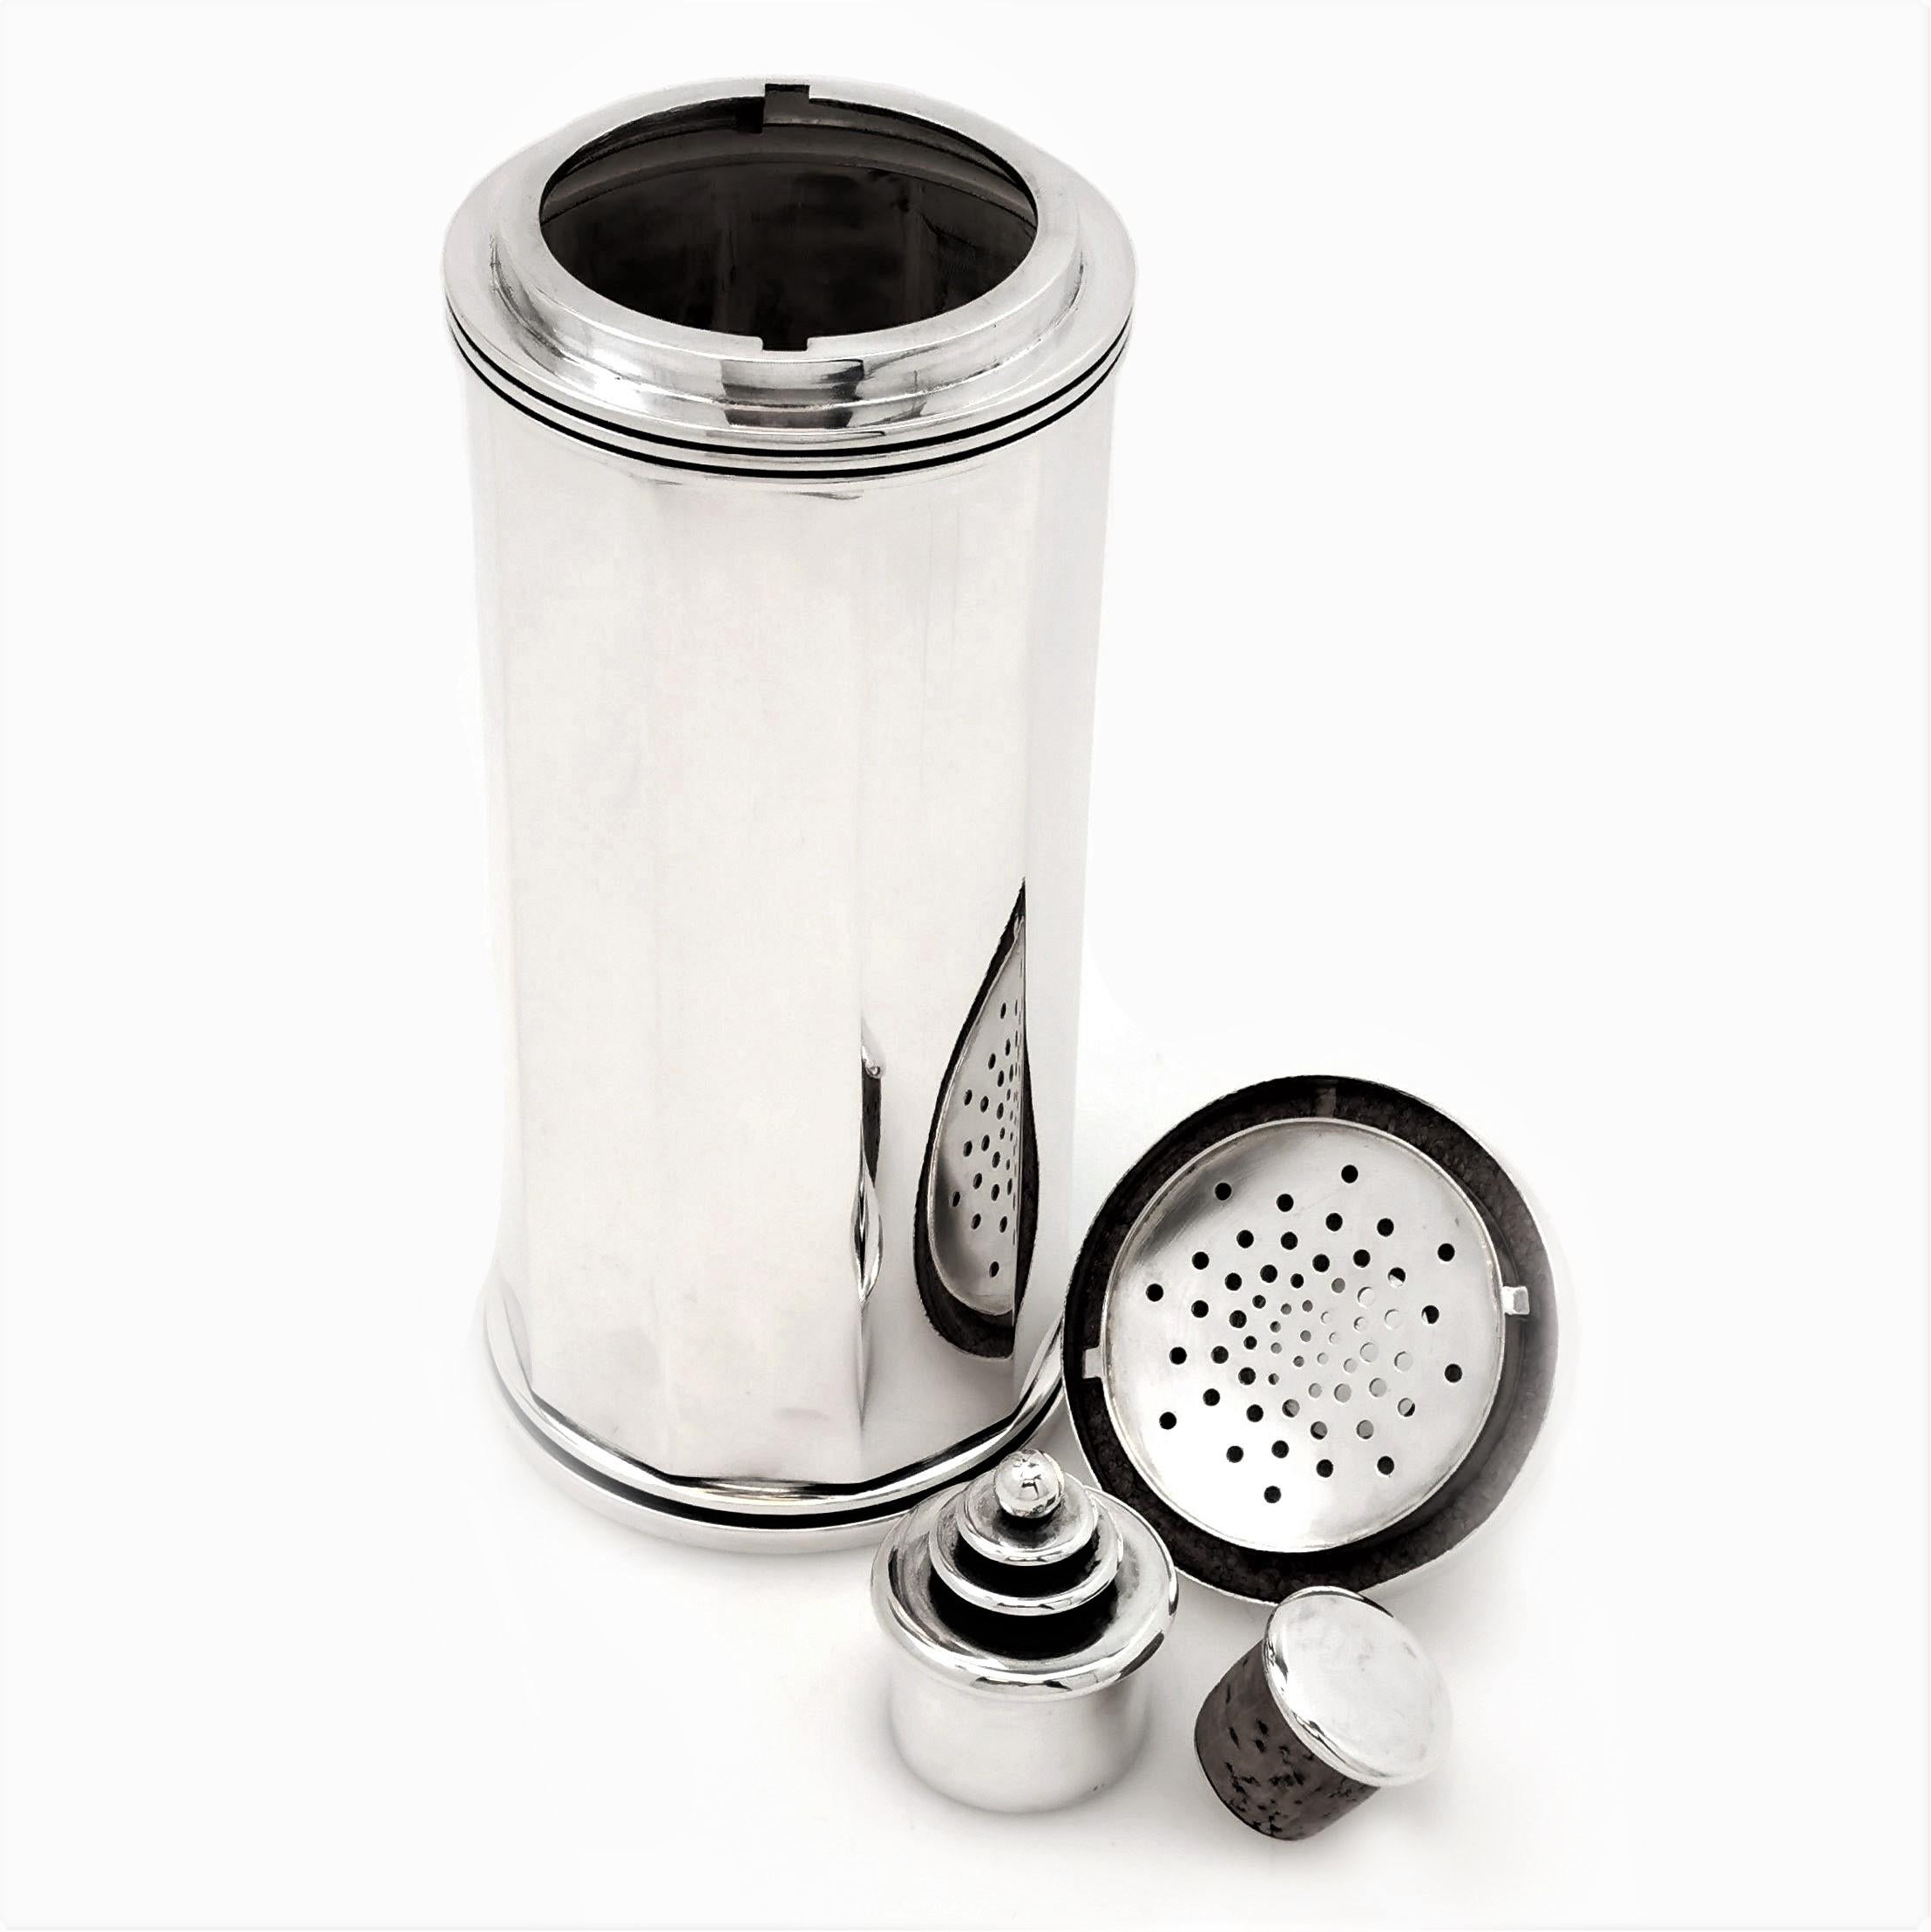 An elegant Danish Silver Cocktail Shaker in a modern Art Deco style decagonal shape. This vintage Cocktail Shaker has a simple, understated design with 10 plain polished side panels. The top of the Shaker has a stepped design and the lid has a round